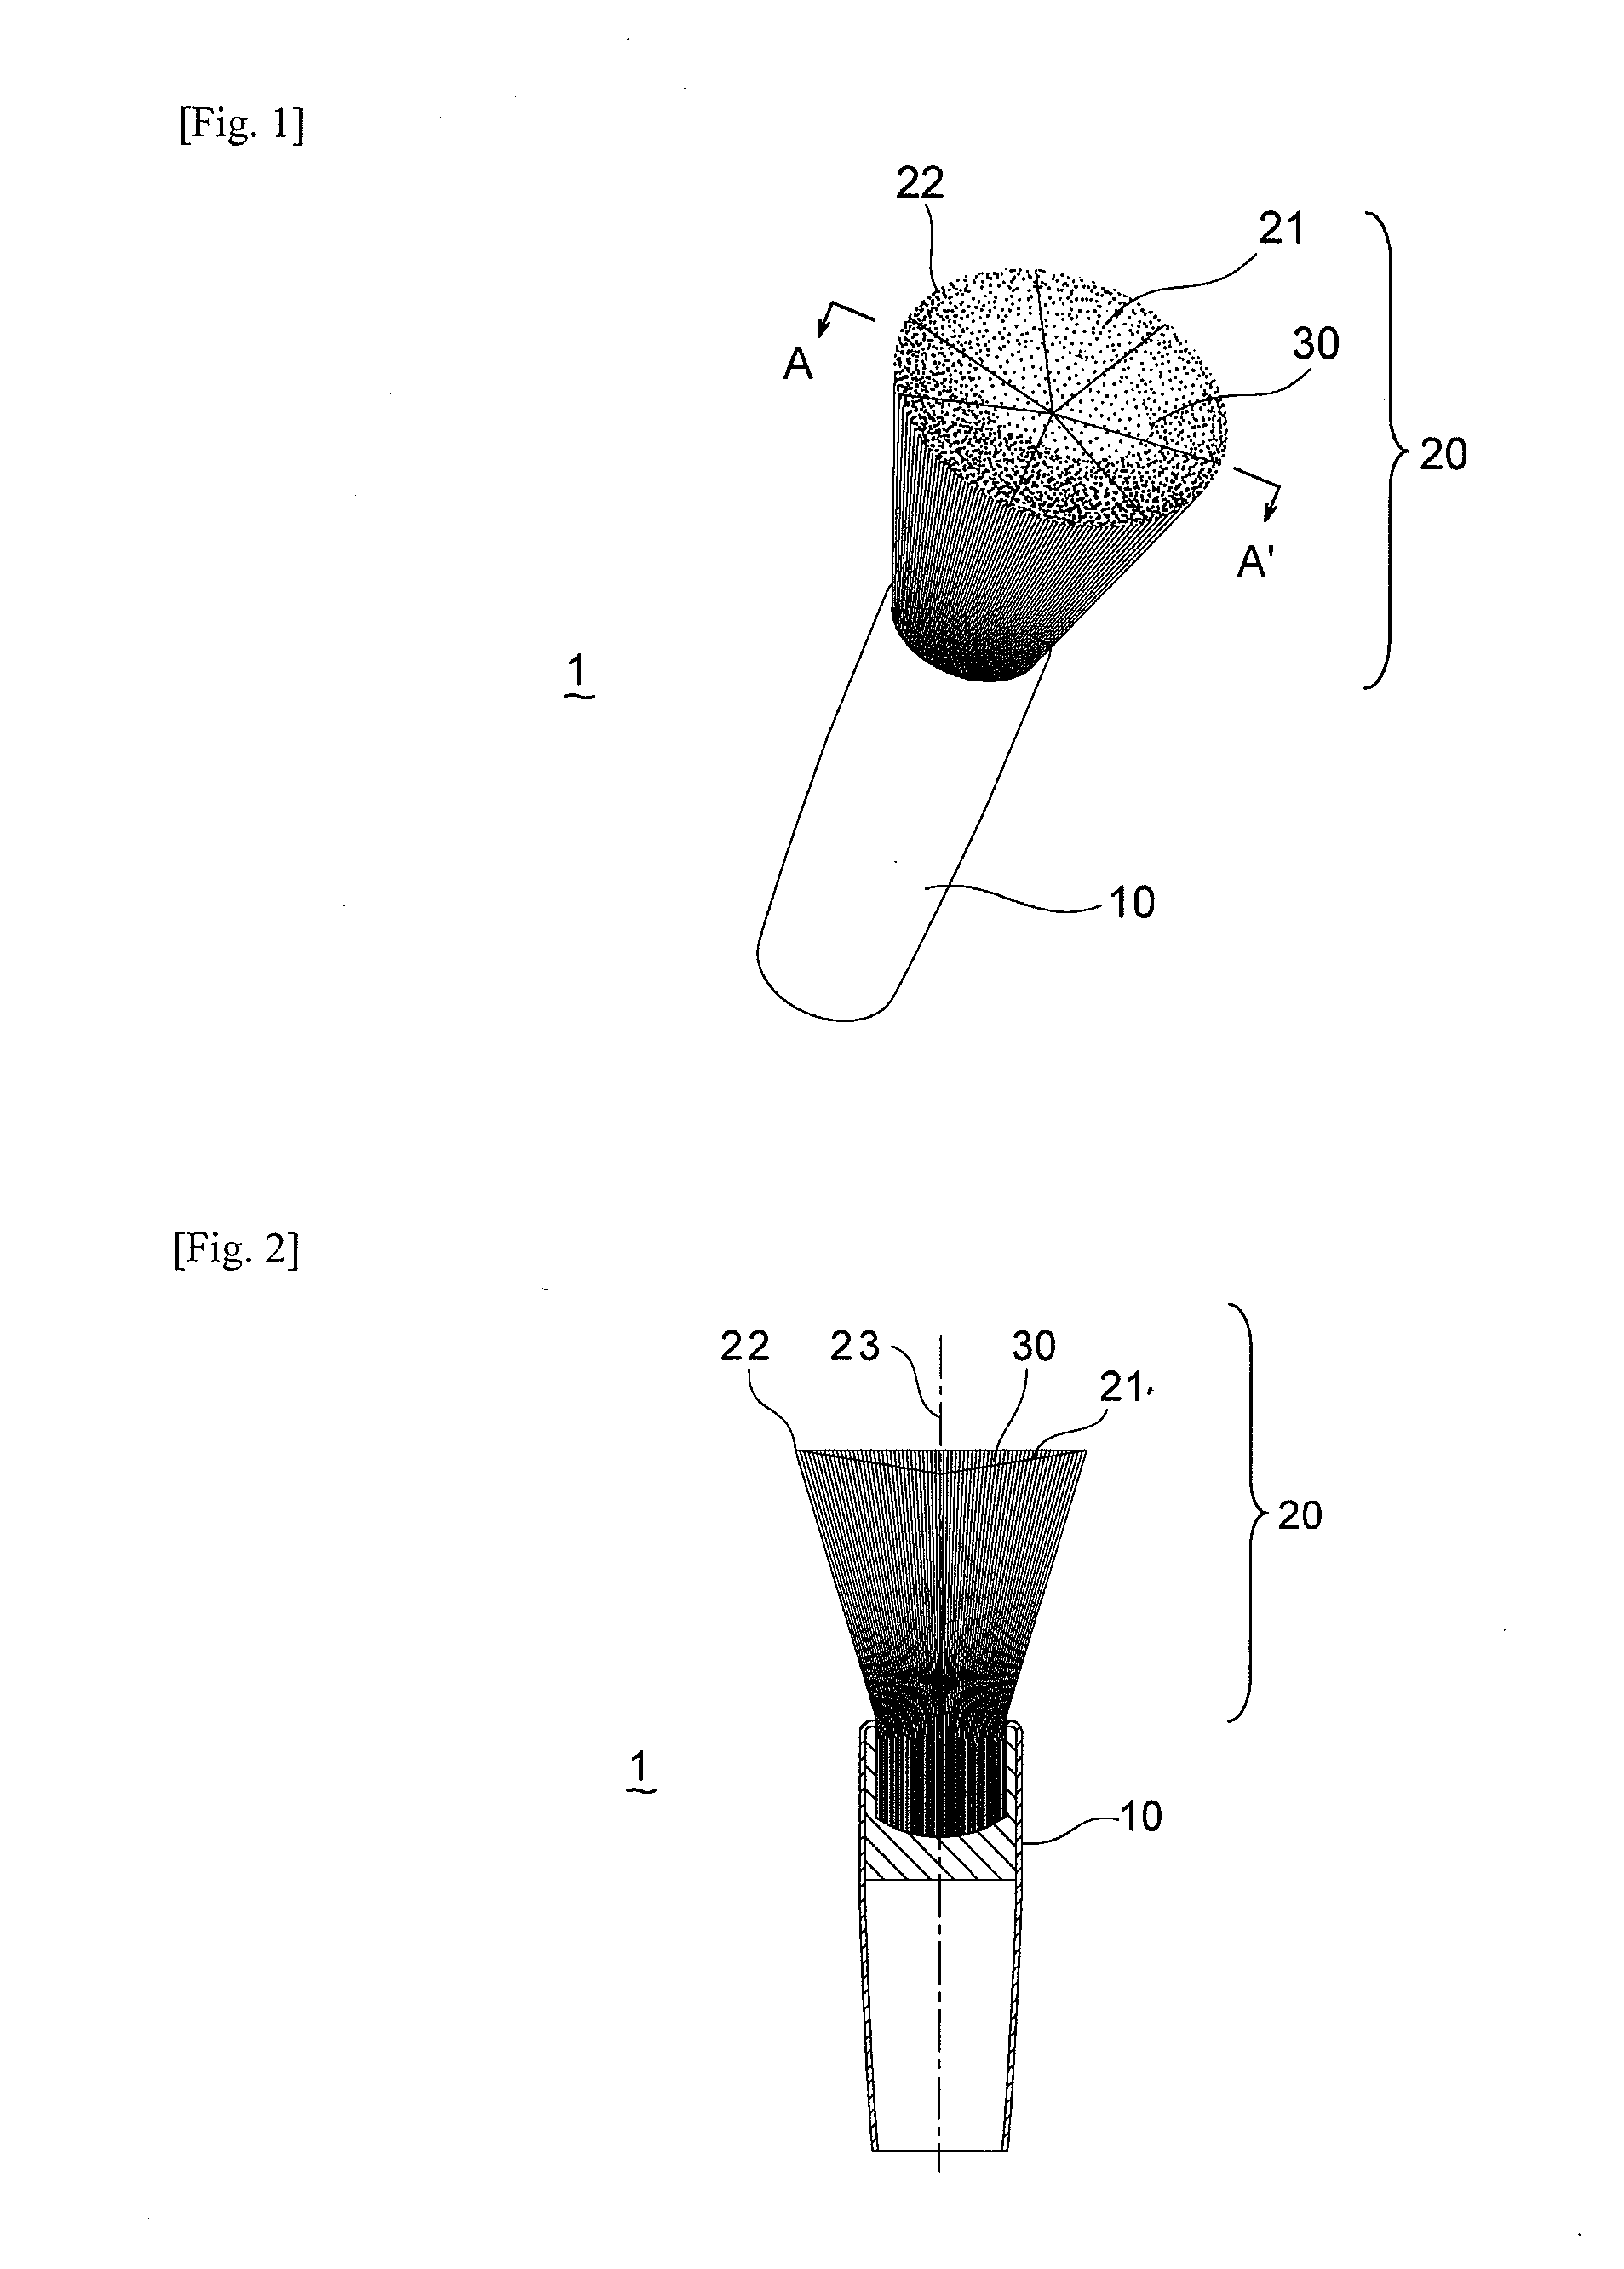 Method for applying cosmetic material using applicator having concave apical surface